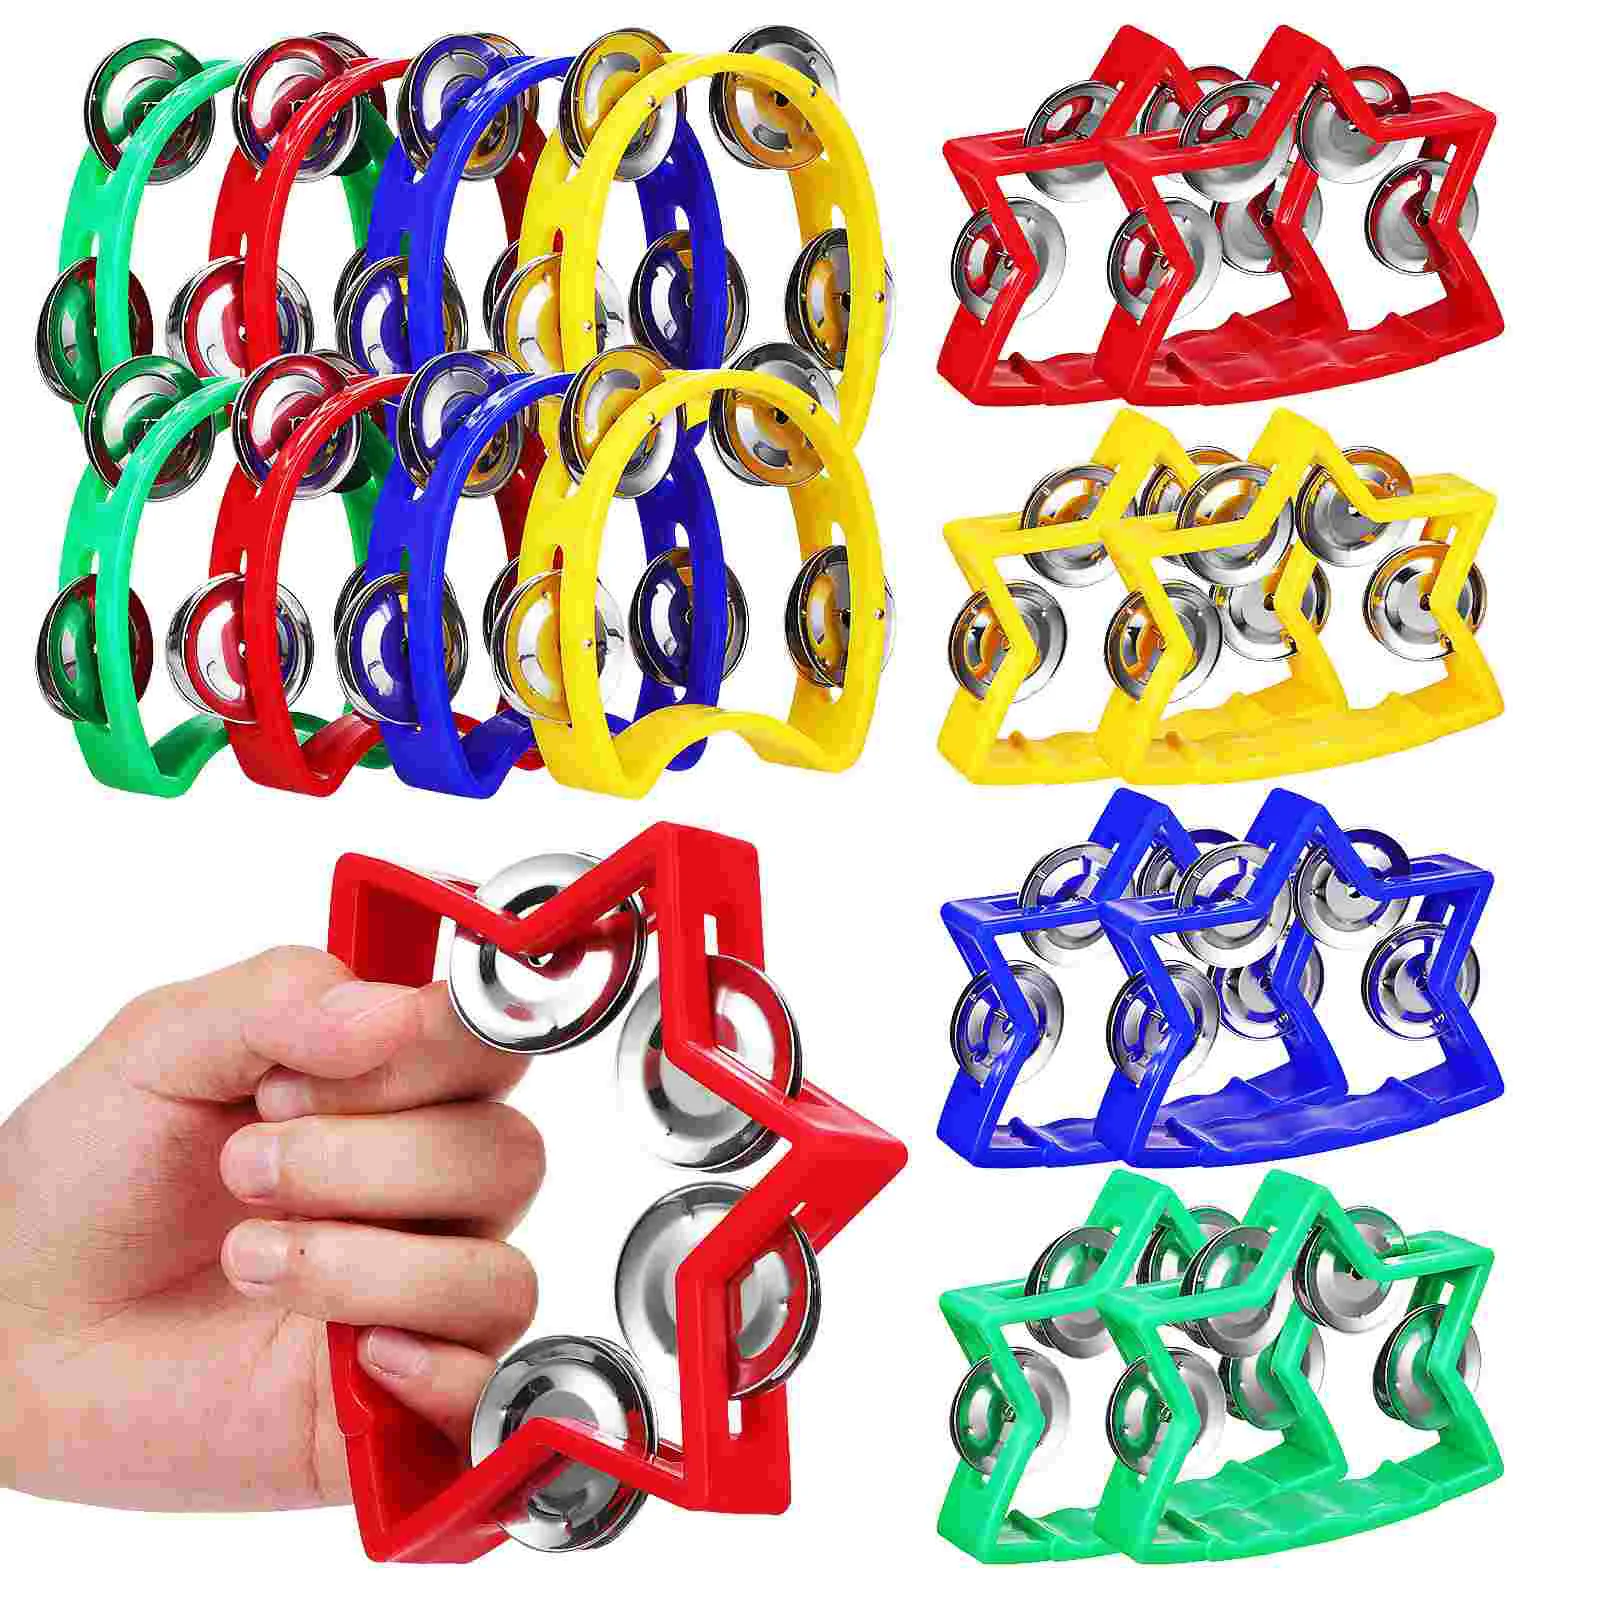 

16pcs Hand Bells Small Tambourine Toys Musical Rhythm Bells Hand Instruments for Beginners Tambourines